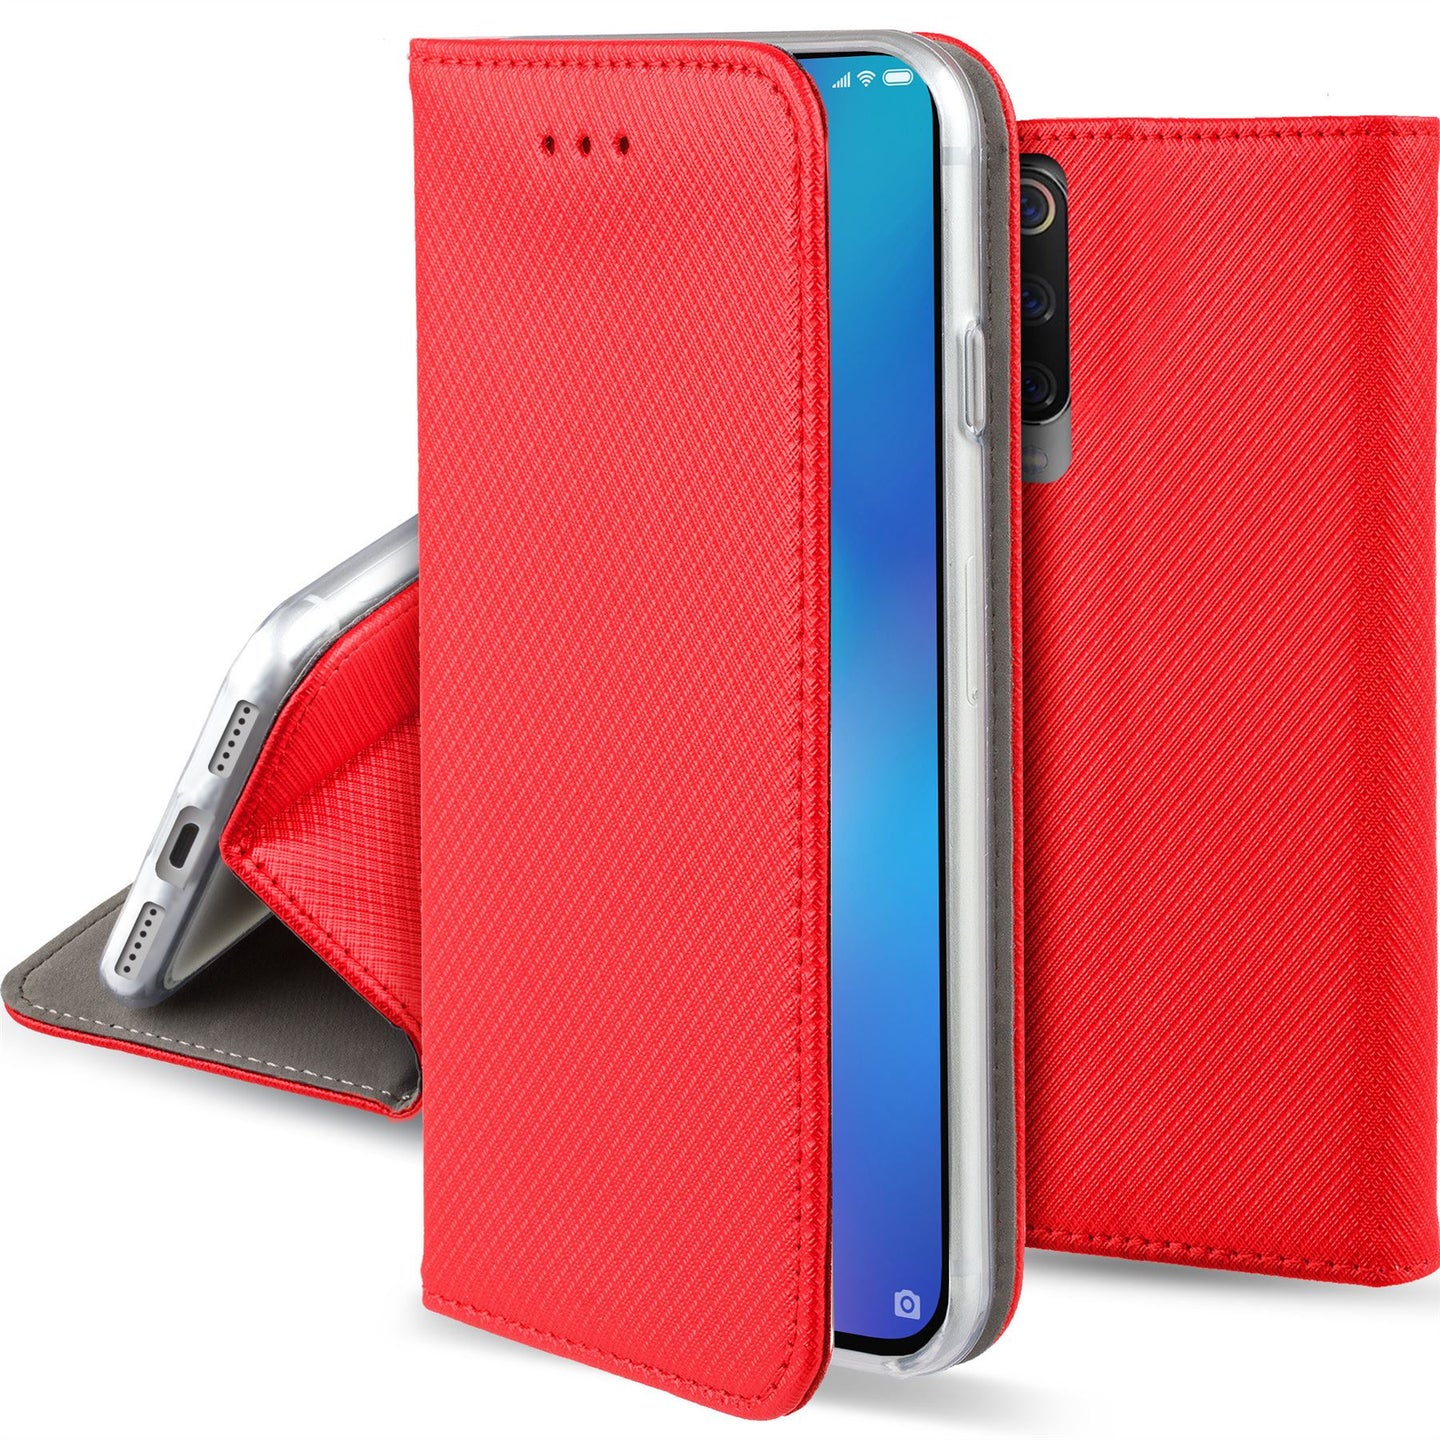 Moozy Case Flip Cover for Xiaomi Mi 9 SE, Red - Smart Magnetic Flip Case with Card Holder and Stand